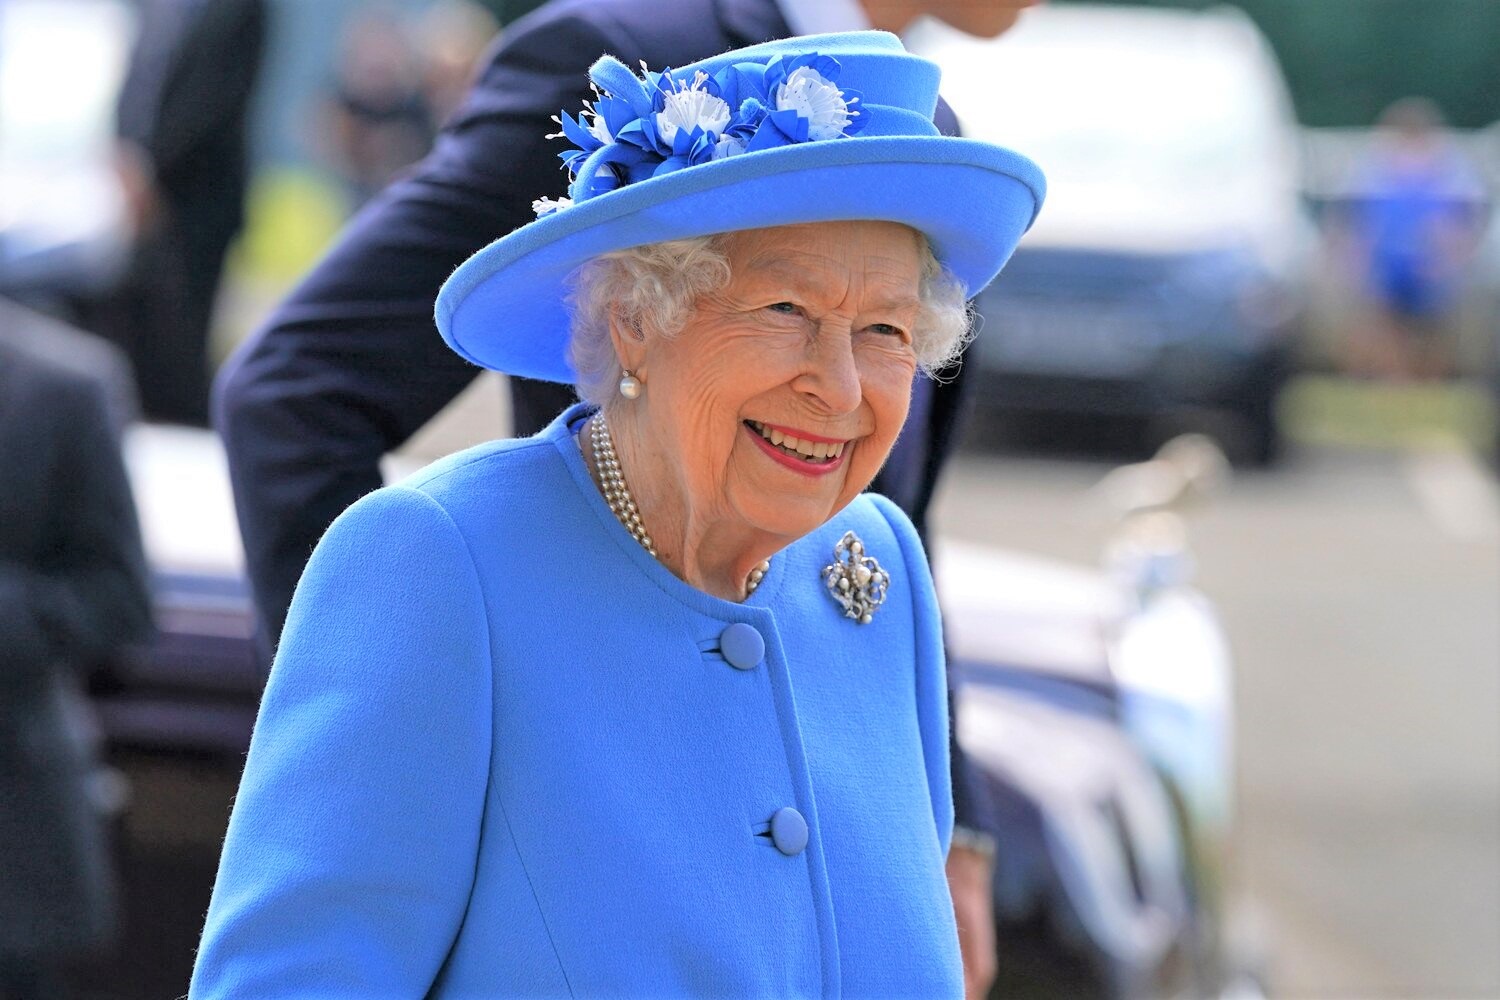 Peasedown festival to return next year for HM The Queen’s Platinum Jubilee celebrations!